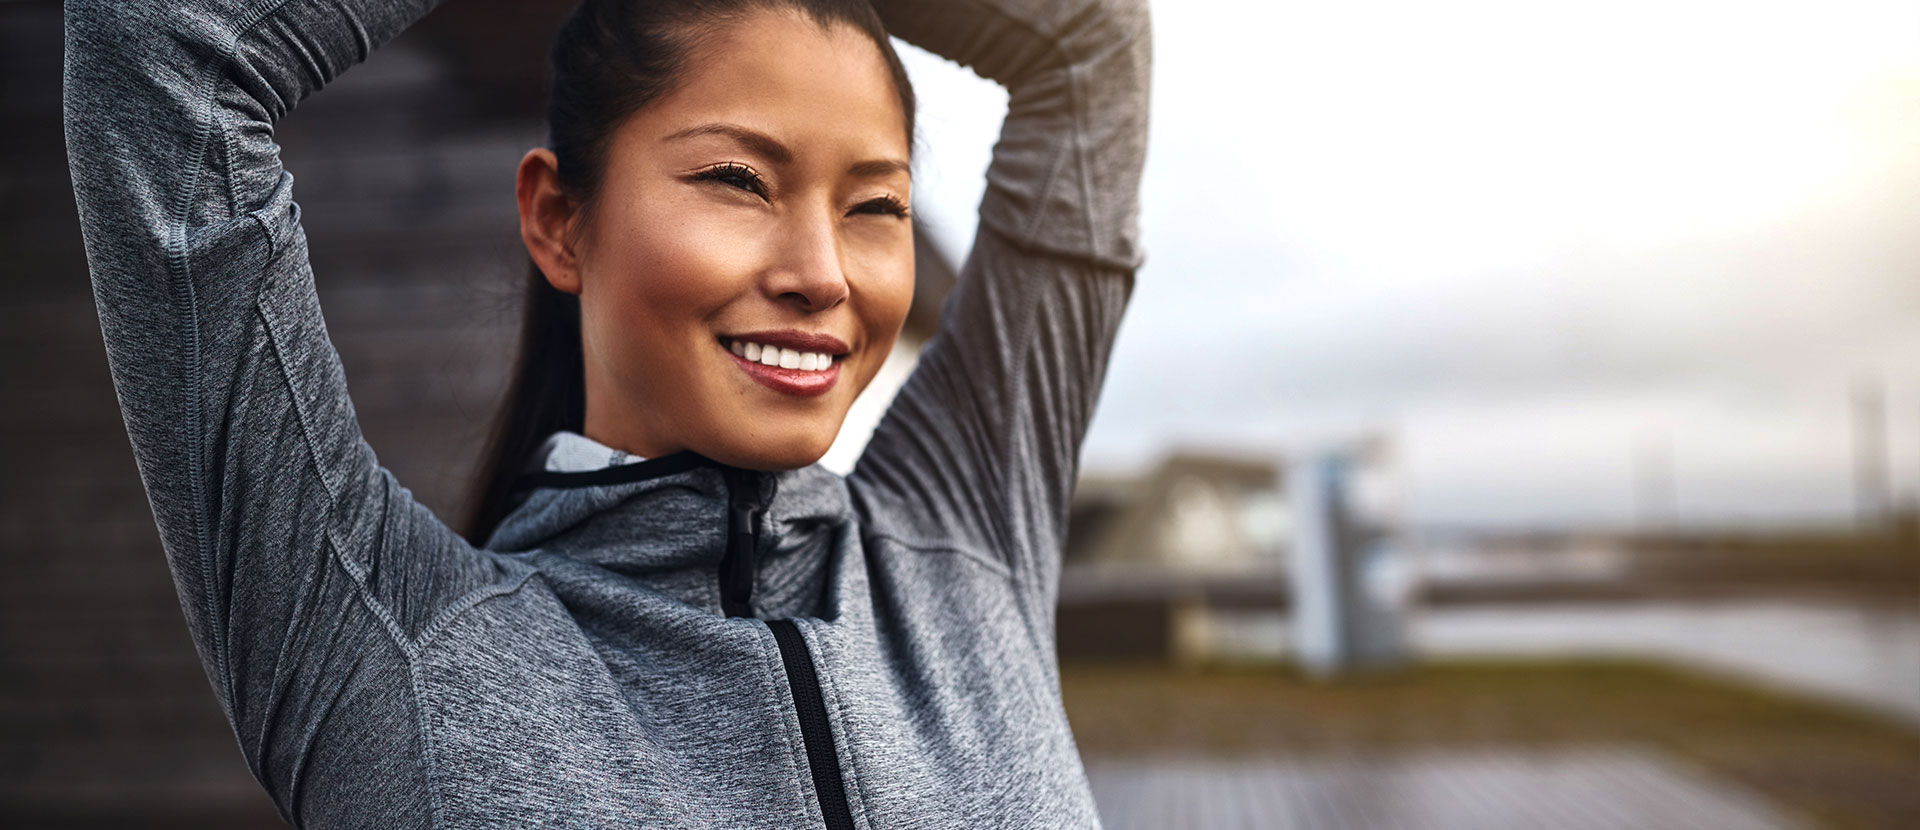 Asian woman smiling wearing gray jacket getting ready for ride